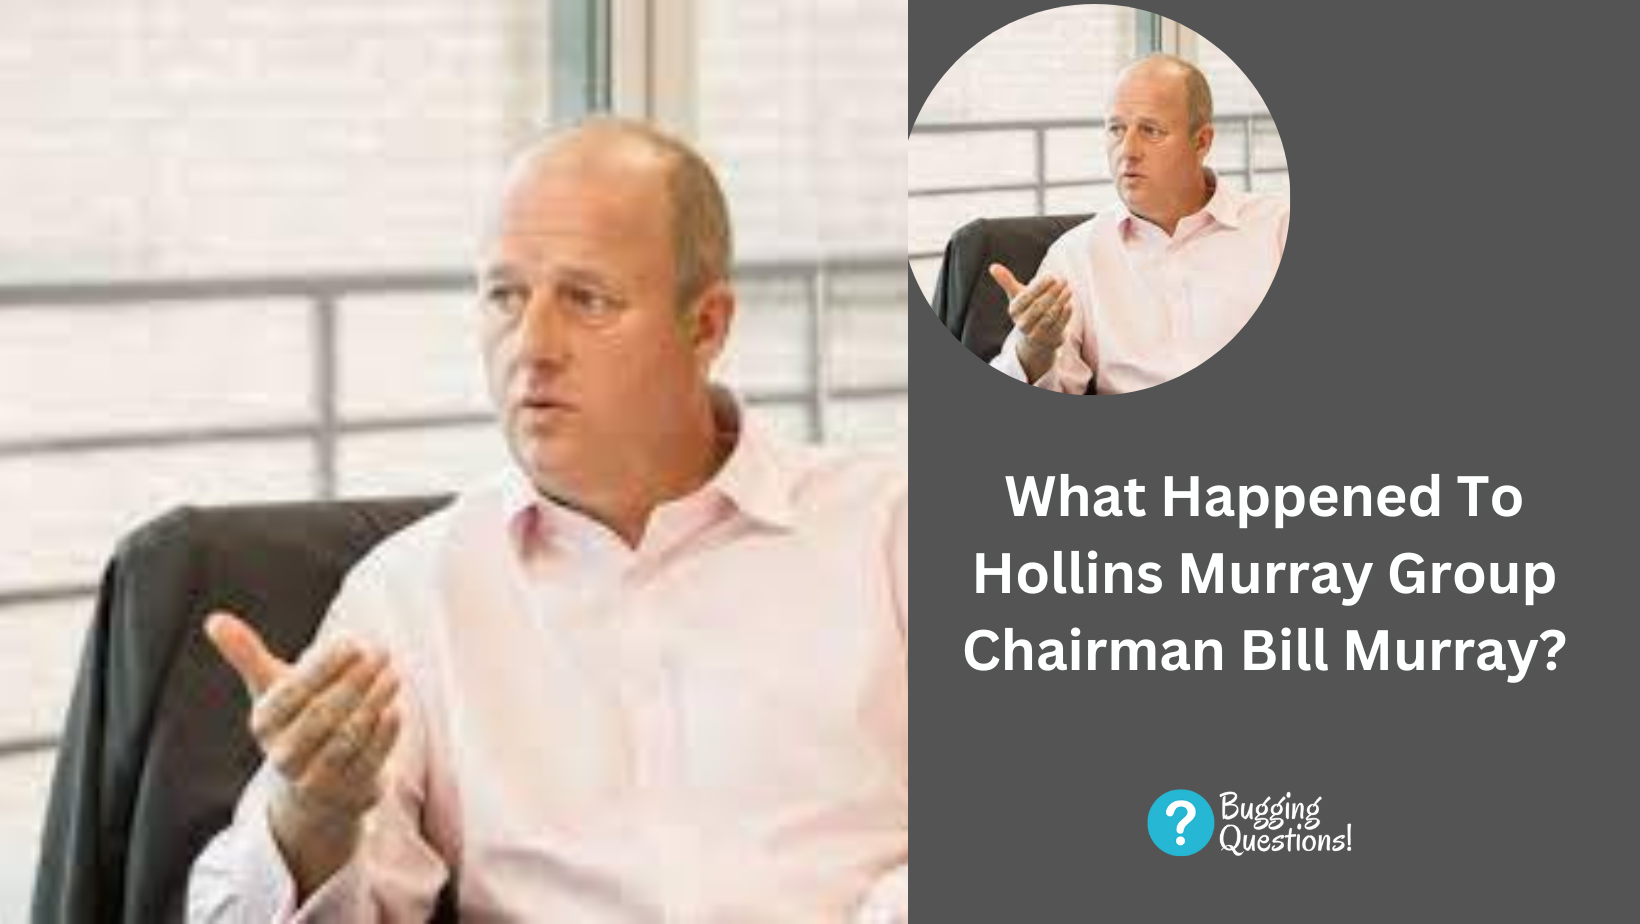 What Happened To Hollins Murray Group Chairman Bill Murray?